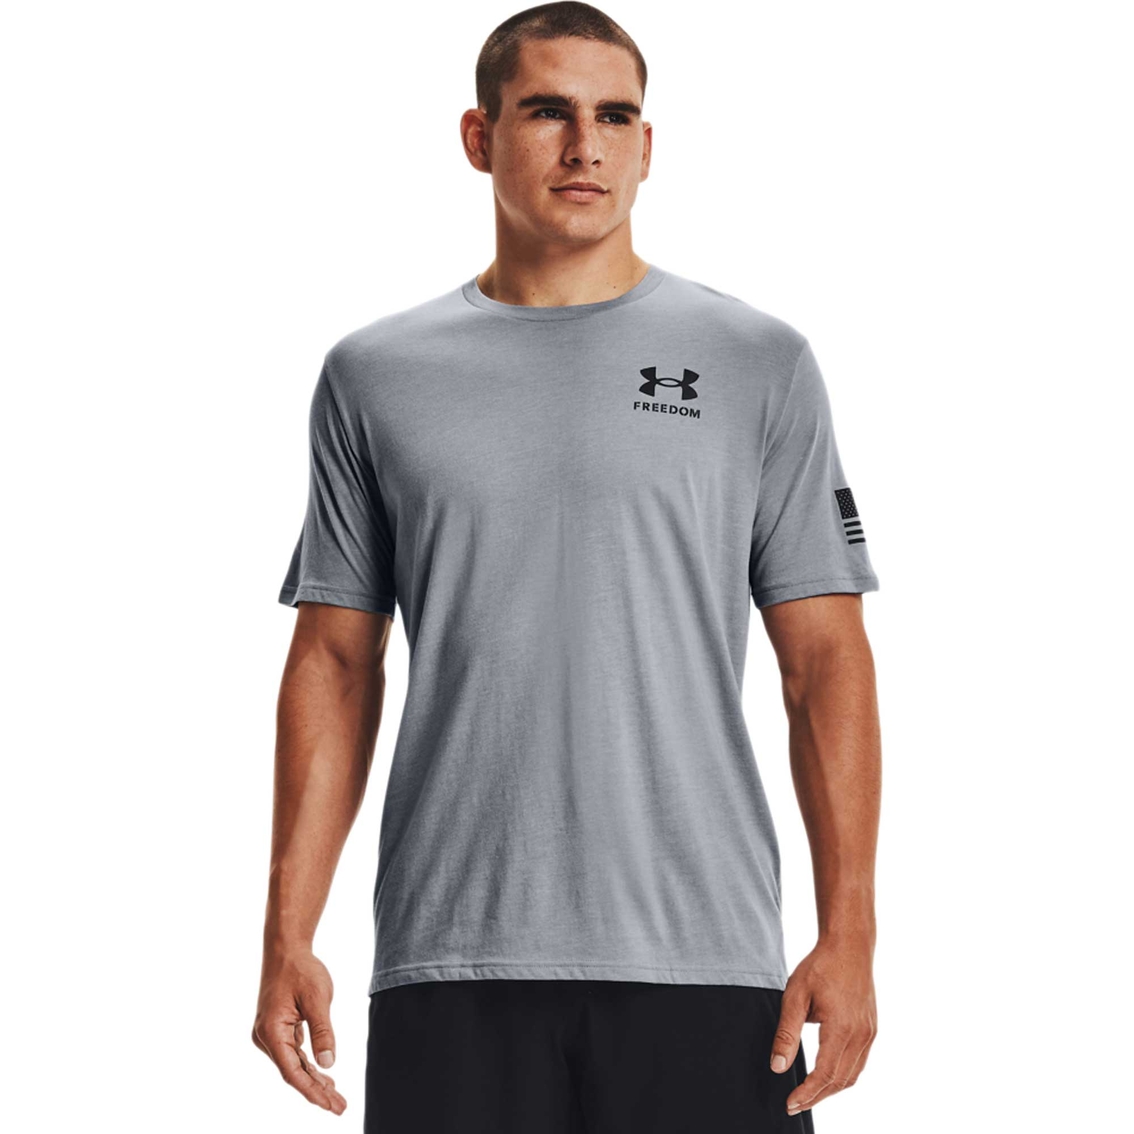 Under Armour New Freedom Flag Tee | Shirts | Clothing & Accessories ...